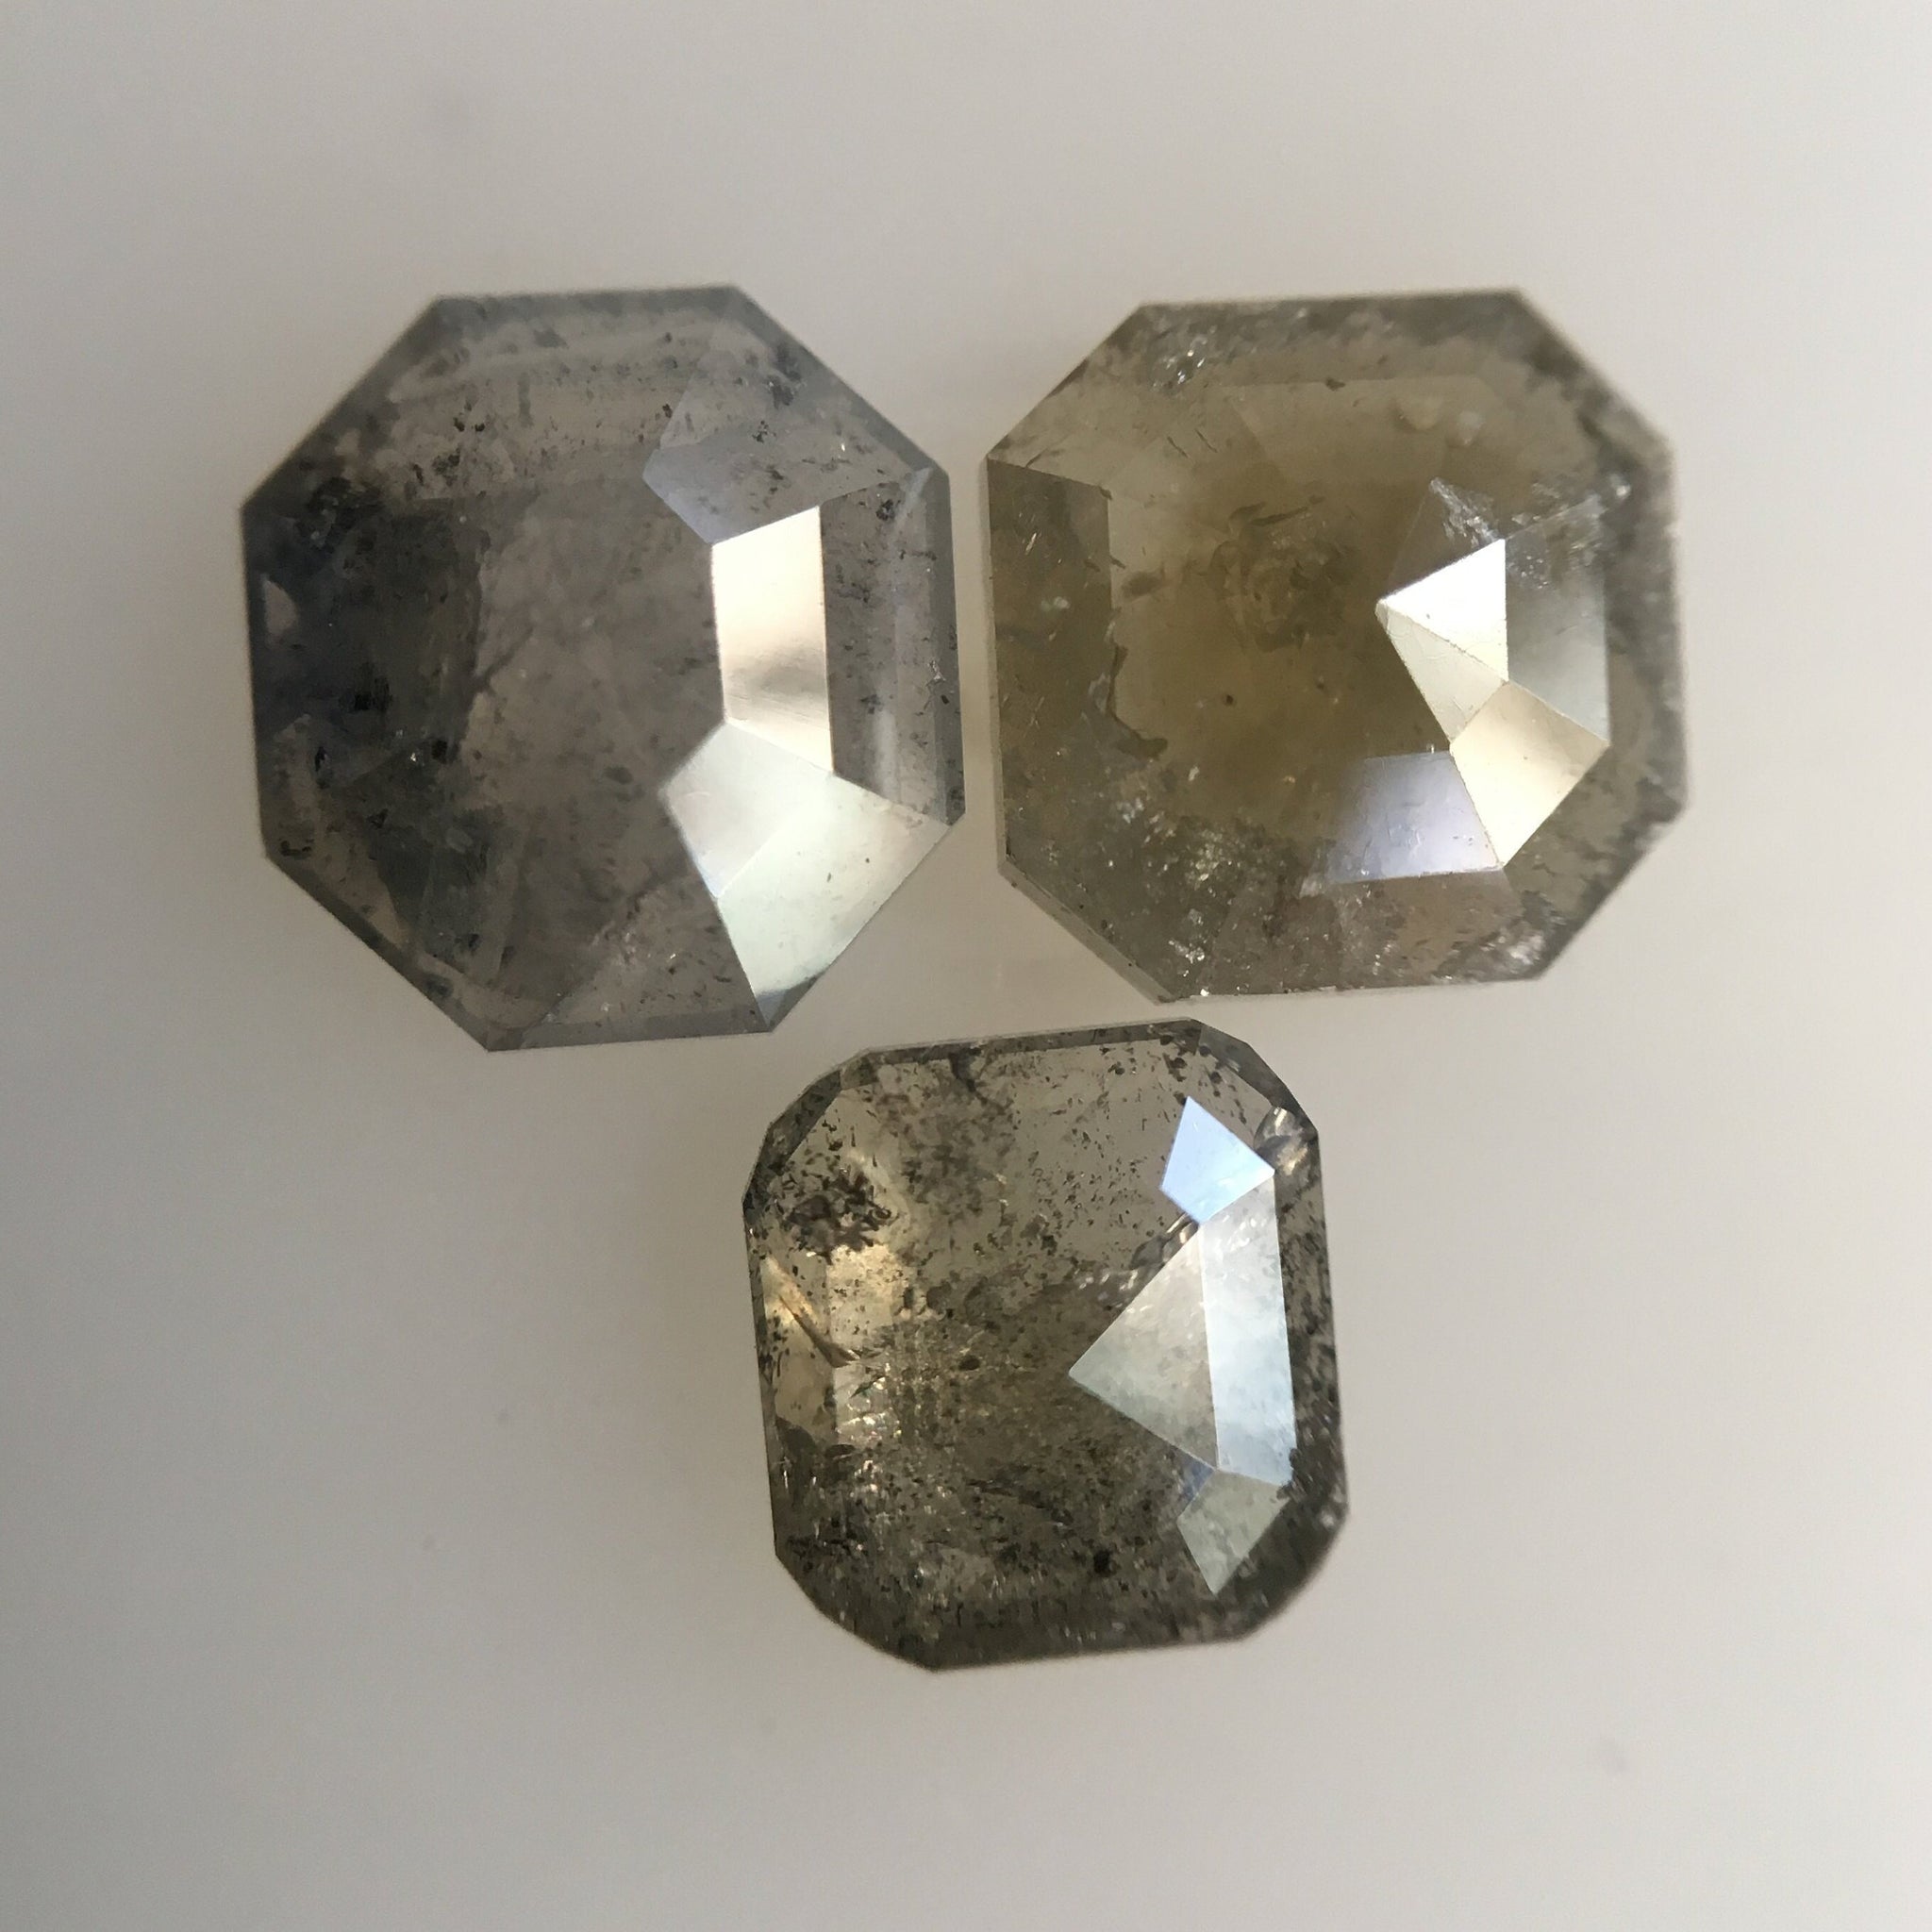 Genuine 2.21 Ct, 3 Pcs of Natural Fancy Gray Color Cushion Shape Diamond Beautiful sparkling faceted perfect for Jewelry AJ03/33